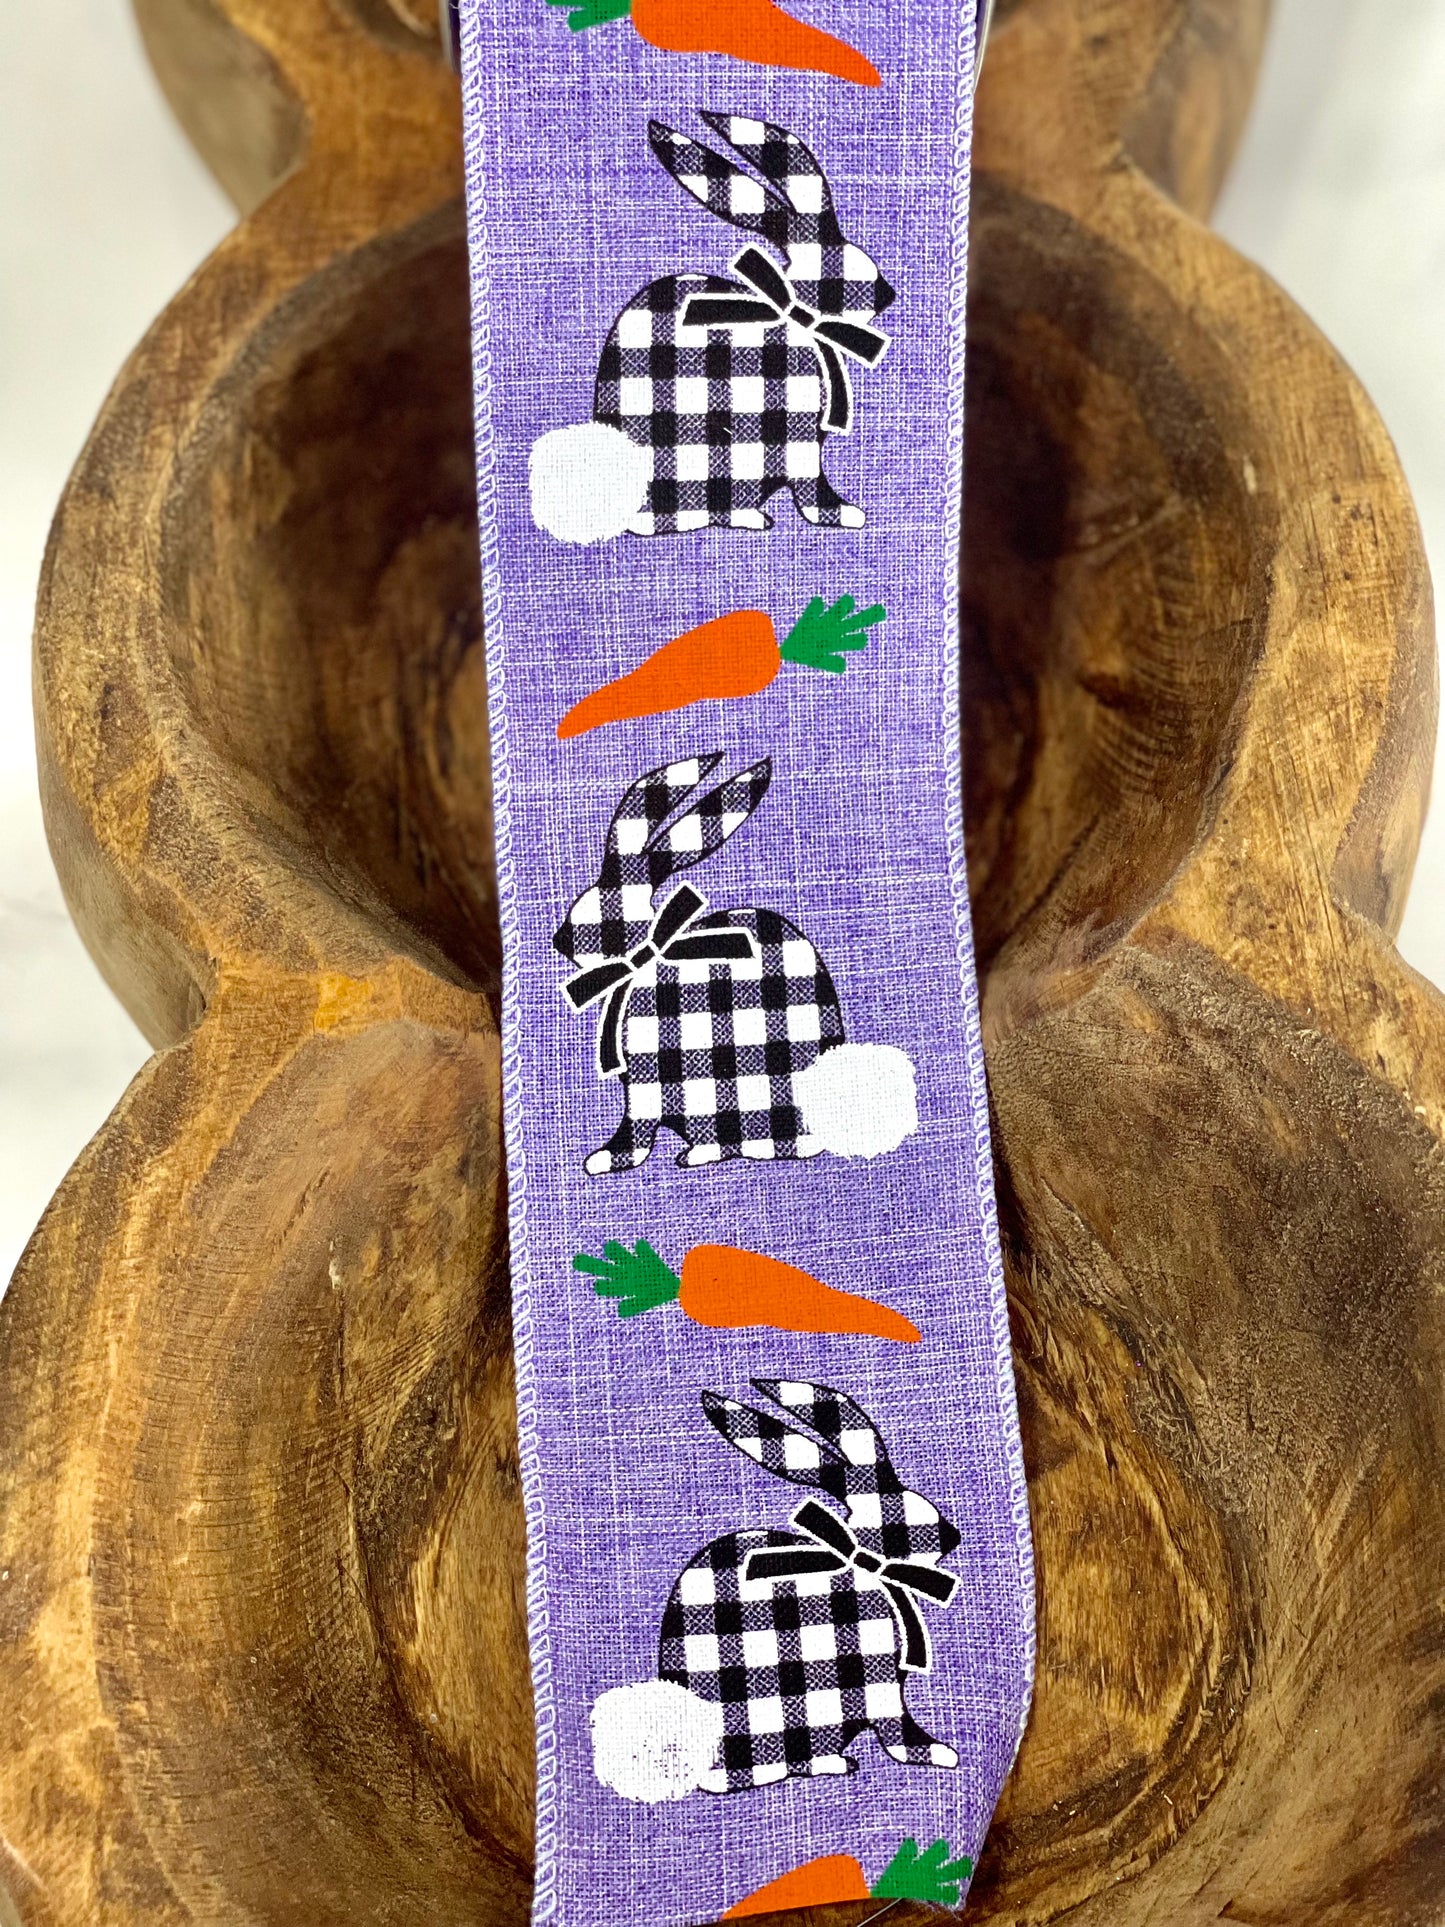 2.5 In x 10 Yard Lavender Black And White Check Bunnies and Carrots Ribbon